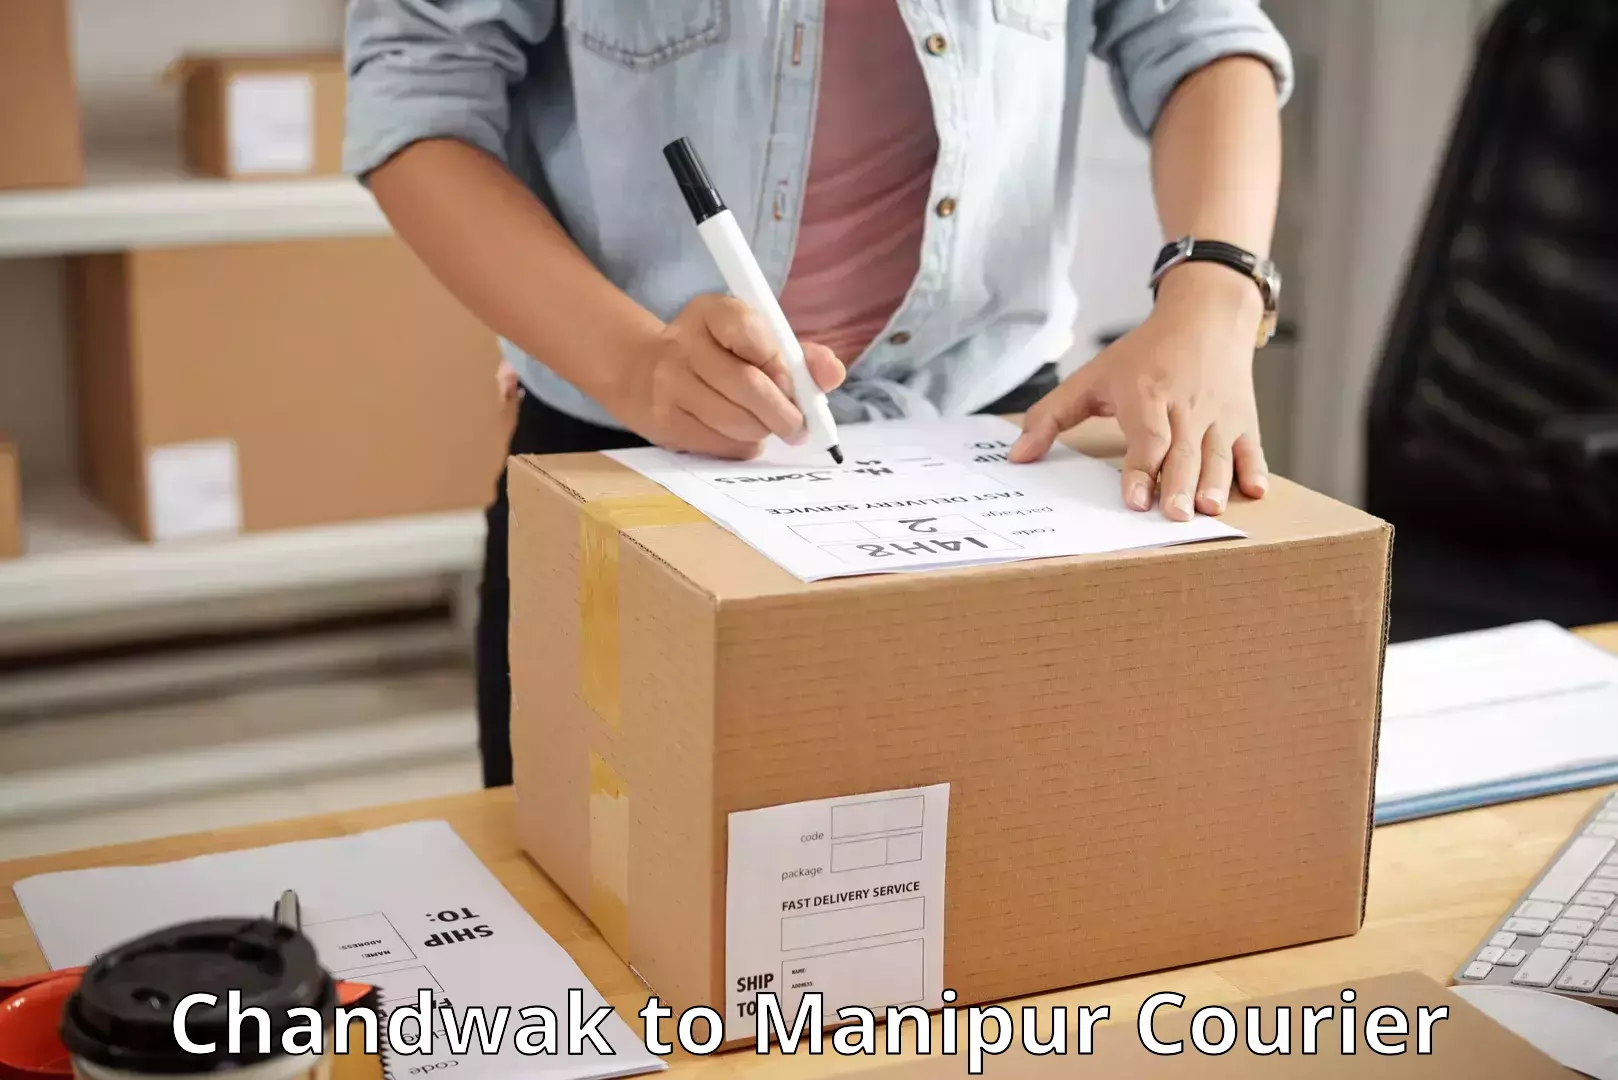 Quality courier partnerships Chandwak to Manipur